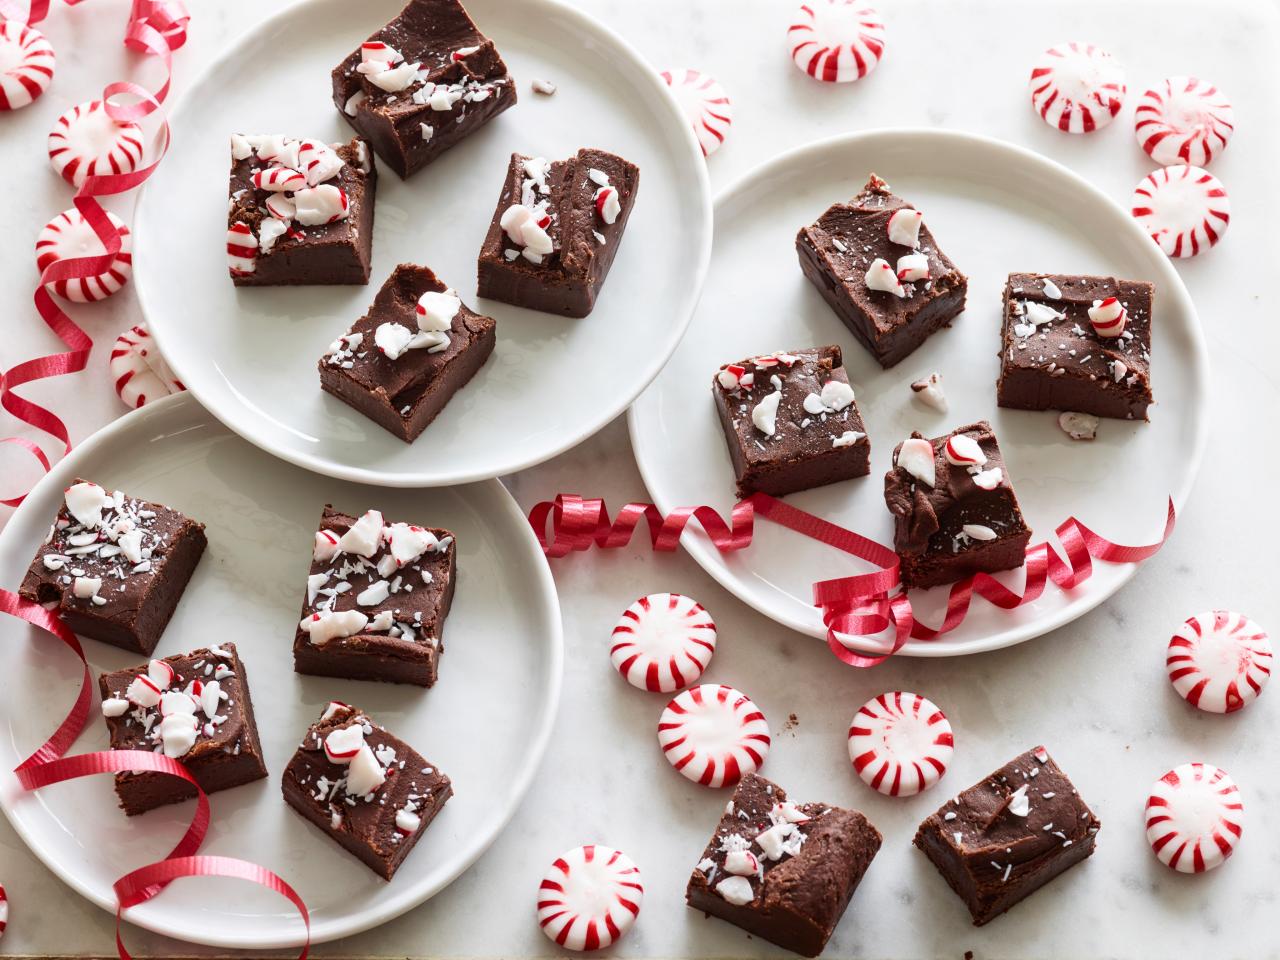 Ree's Quick and Easy Peppermint Fudge - 12 Days of Cookies | FN Dish - Behind-the-Scenes, Food ...